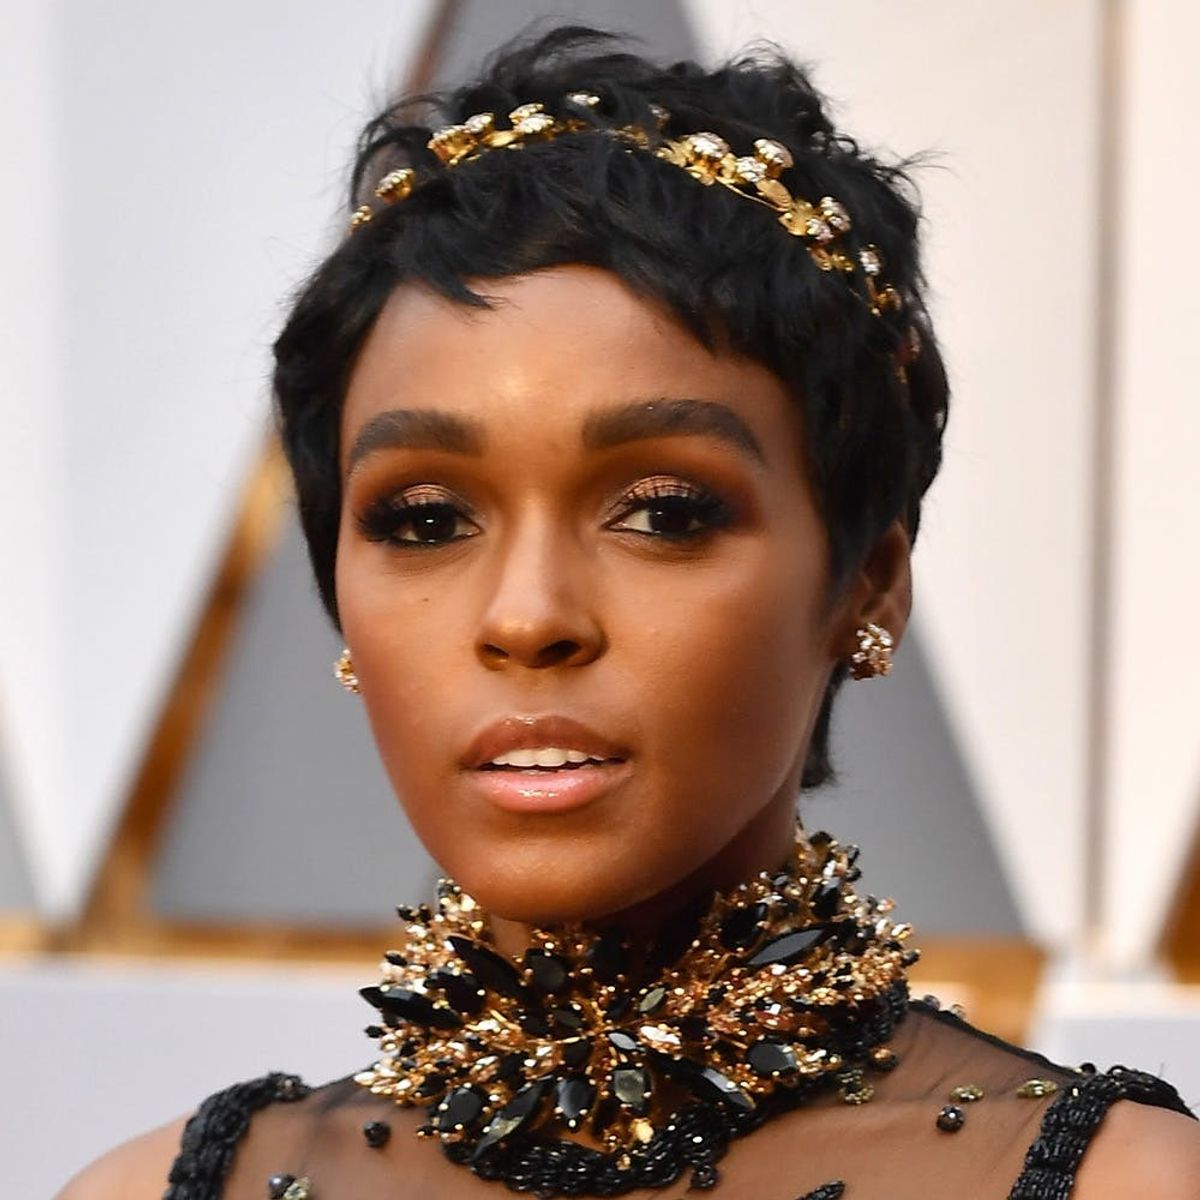 Princess Headbands Were the Hottest Trend at the Oscars